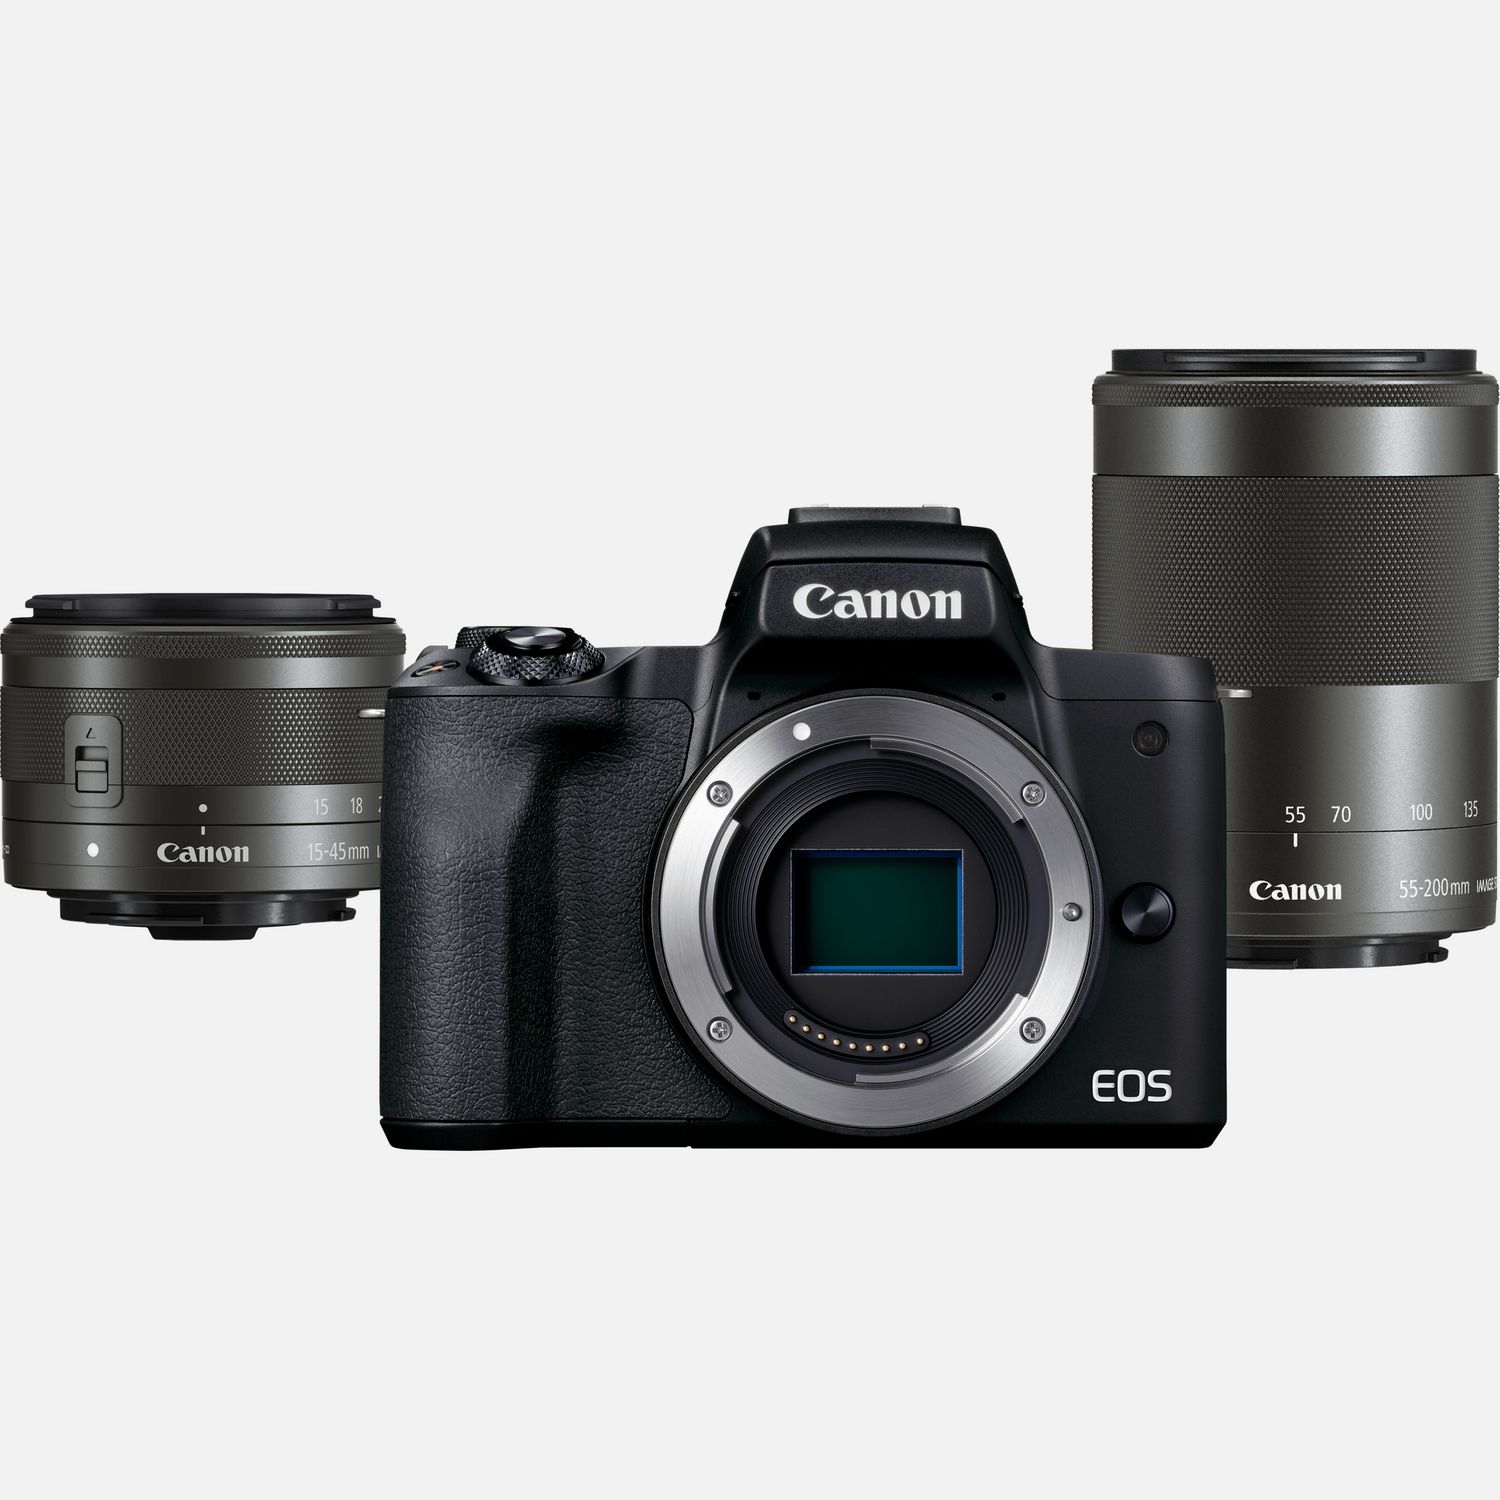 Image of Videocamera mirrorless Canon EOS M50 Mark II, Nero + obiettivi EF-M 15-45mm IS STM ed EF-M 55-200mm IS STM